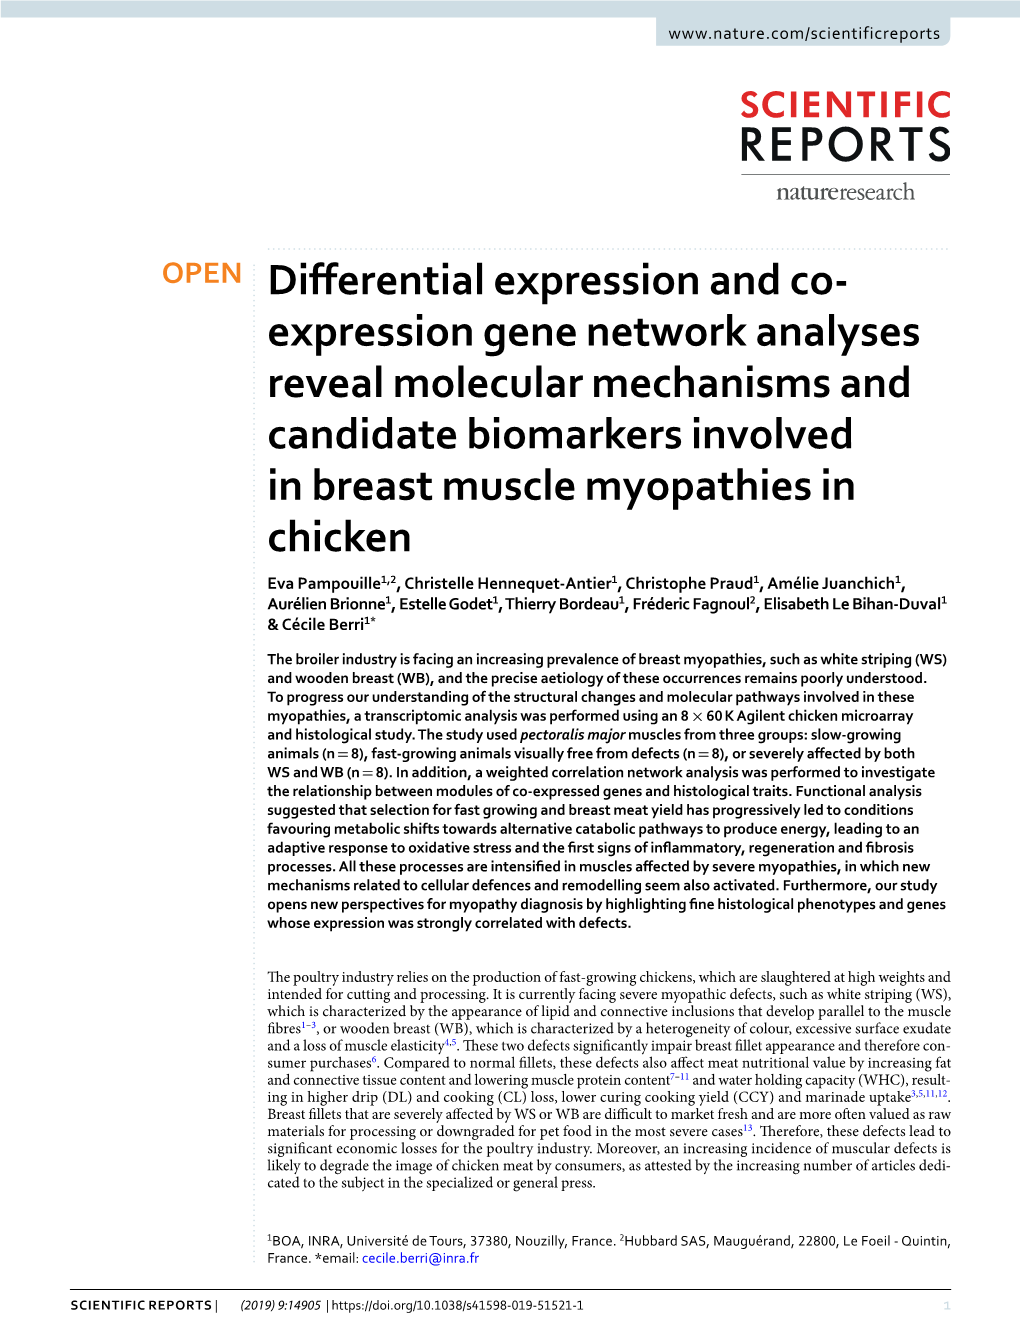 Expression Gene Network Analyses Reveal Molecular Mechanisms And